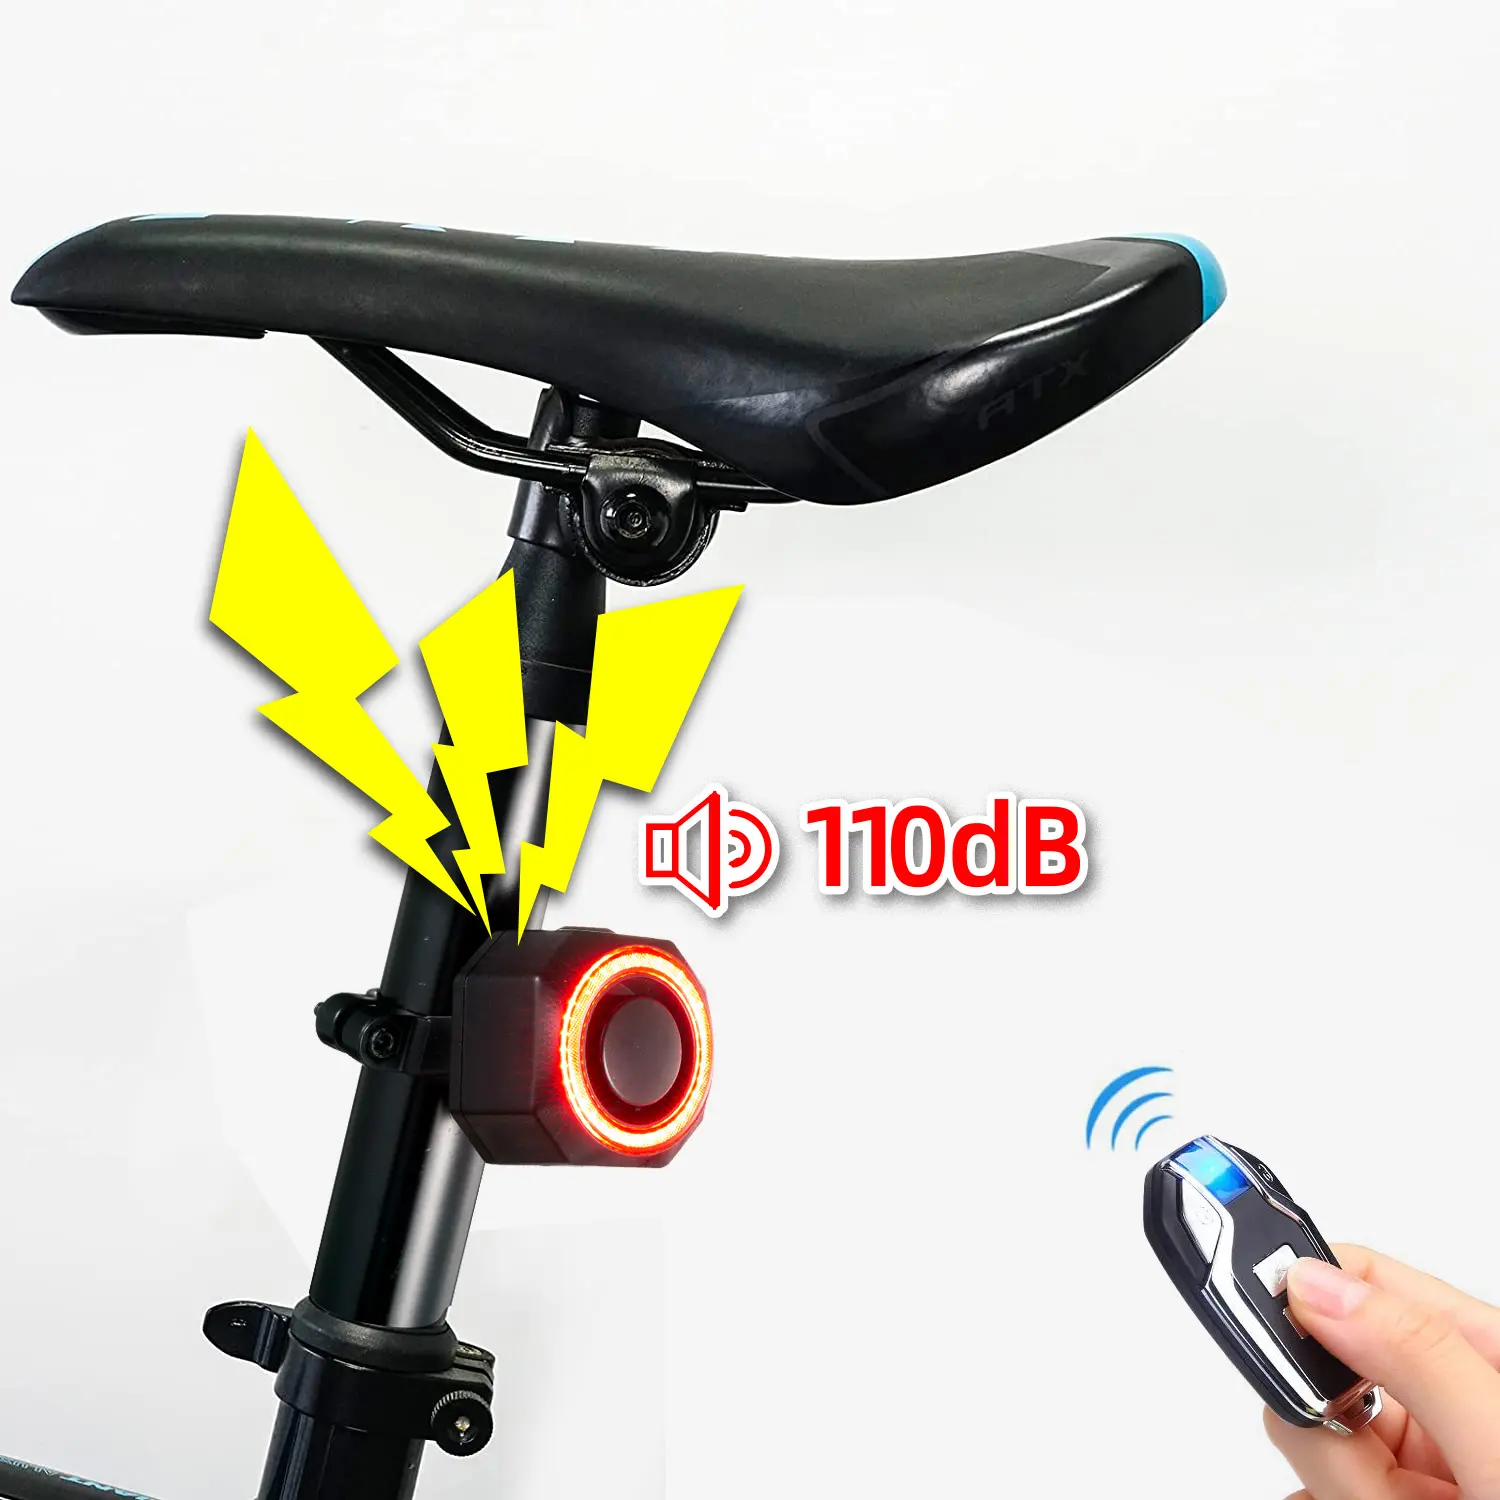 USB Rechargeable Smart Bike Tail Light with Turn Signals and Automatic Brake Light Wireless Remote Control Bike Rear Light Back